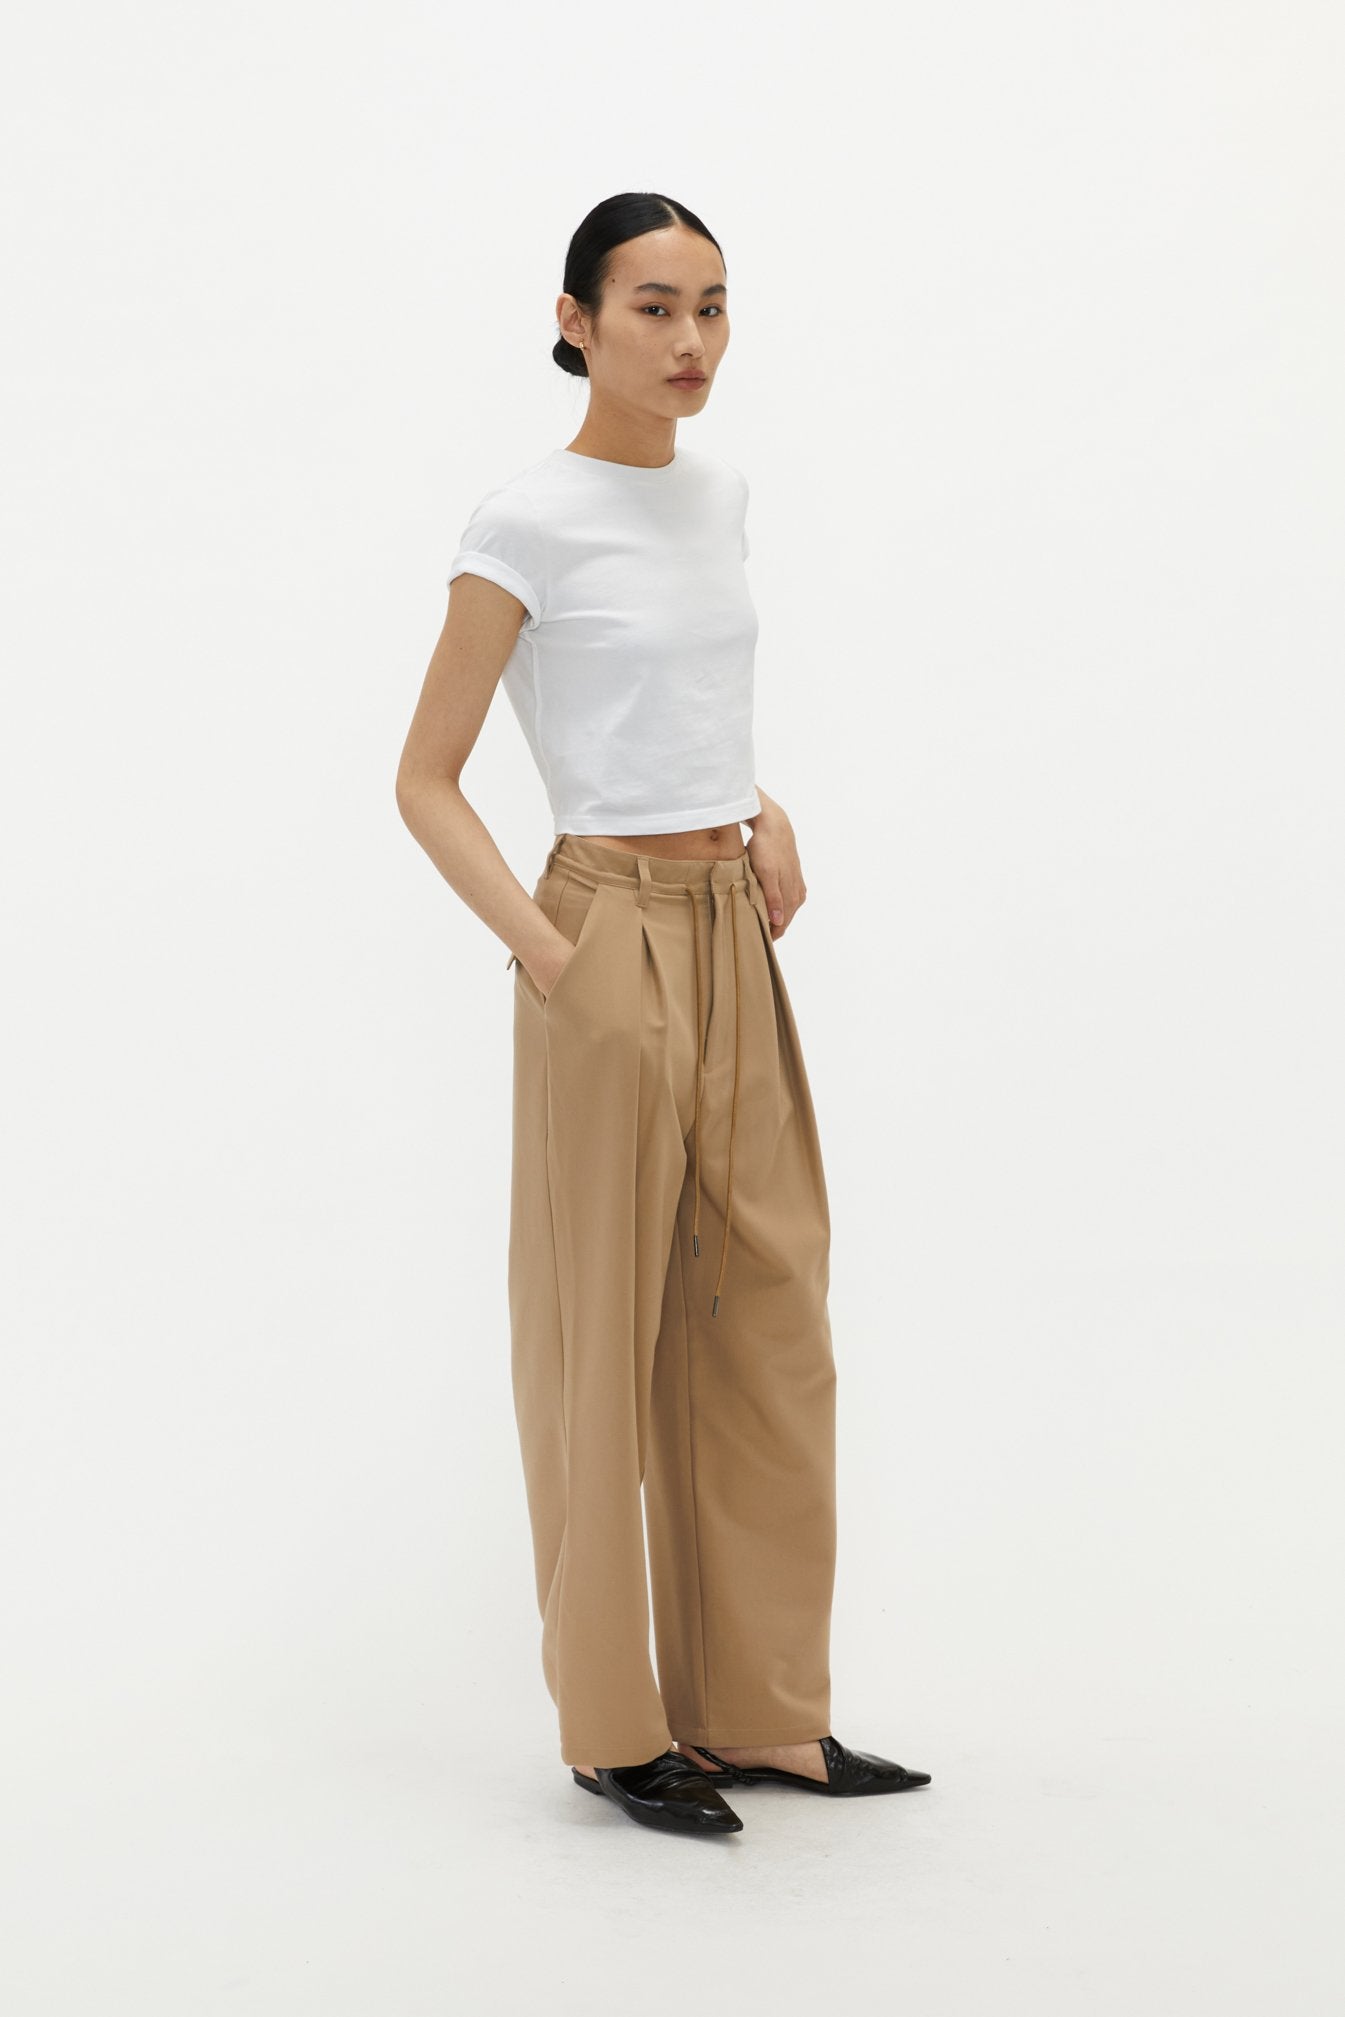 by DOE - Sculpted Airy Pants – FRECKL STUDIO